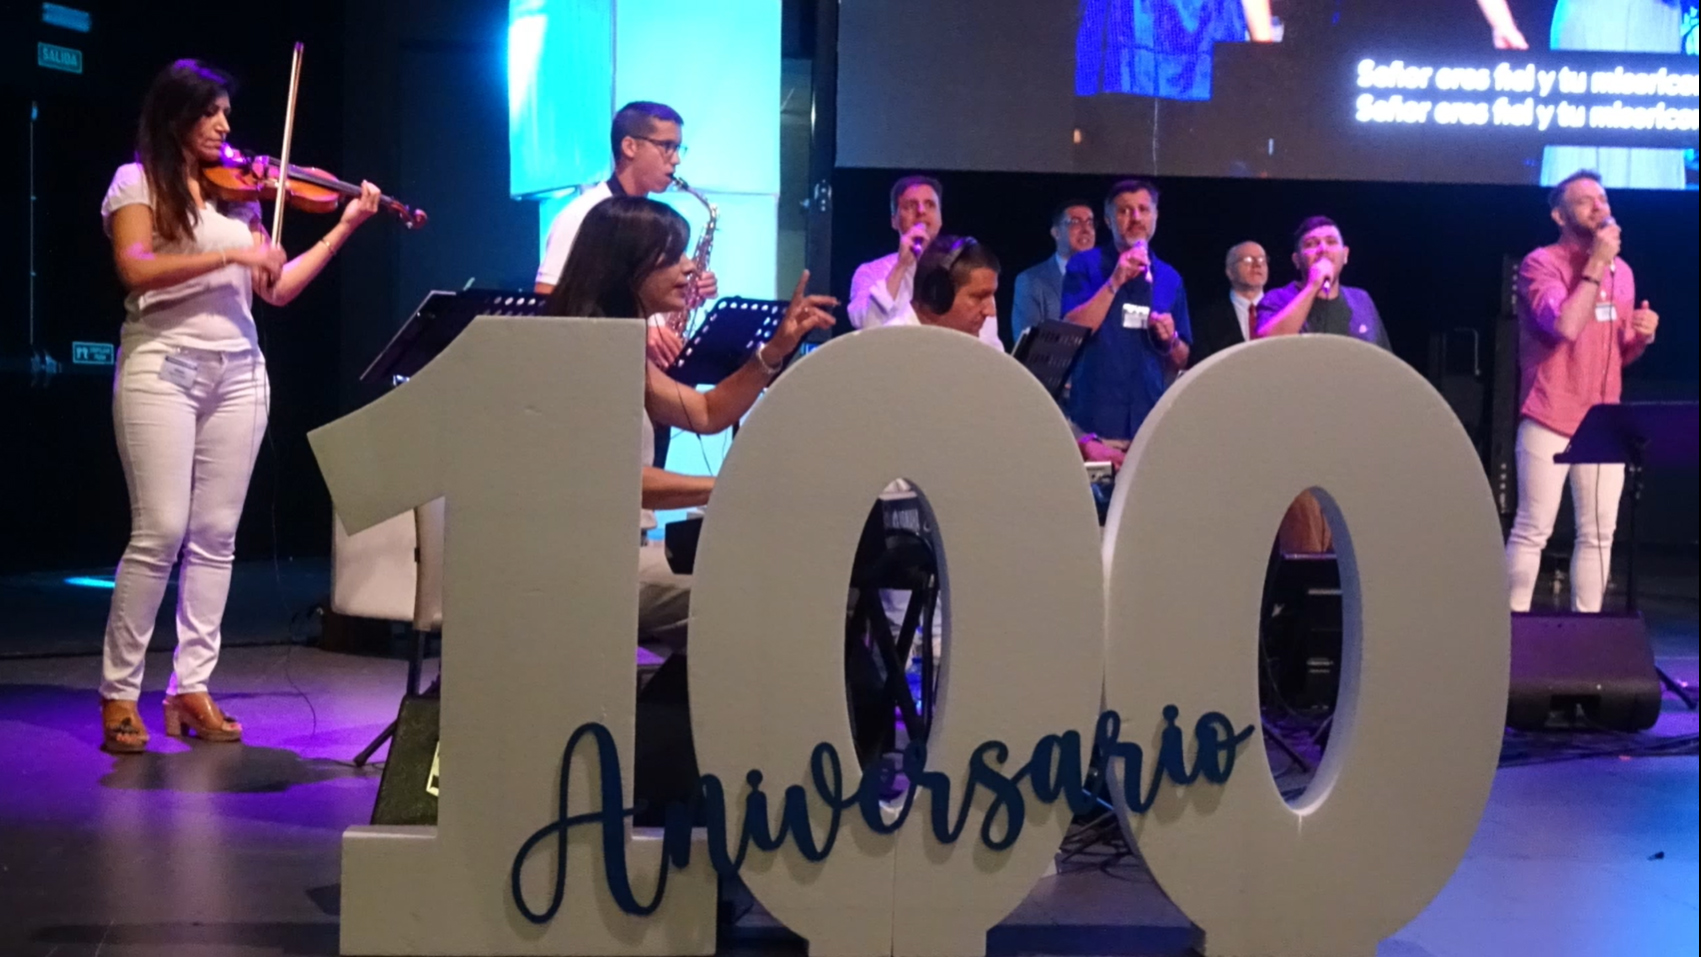 Spanish Baptist Union celebrated its centenary with a renewed commitment to mission